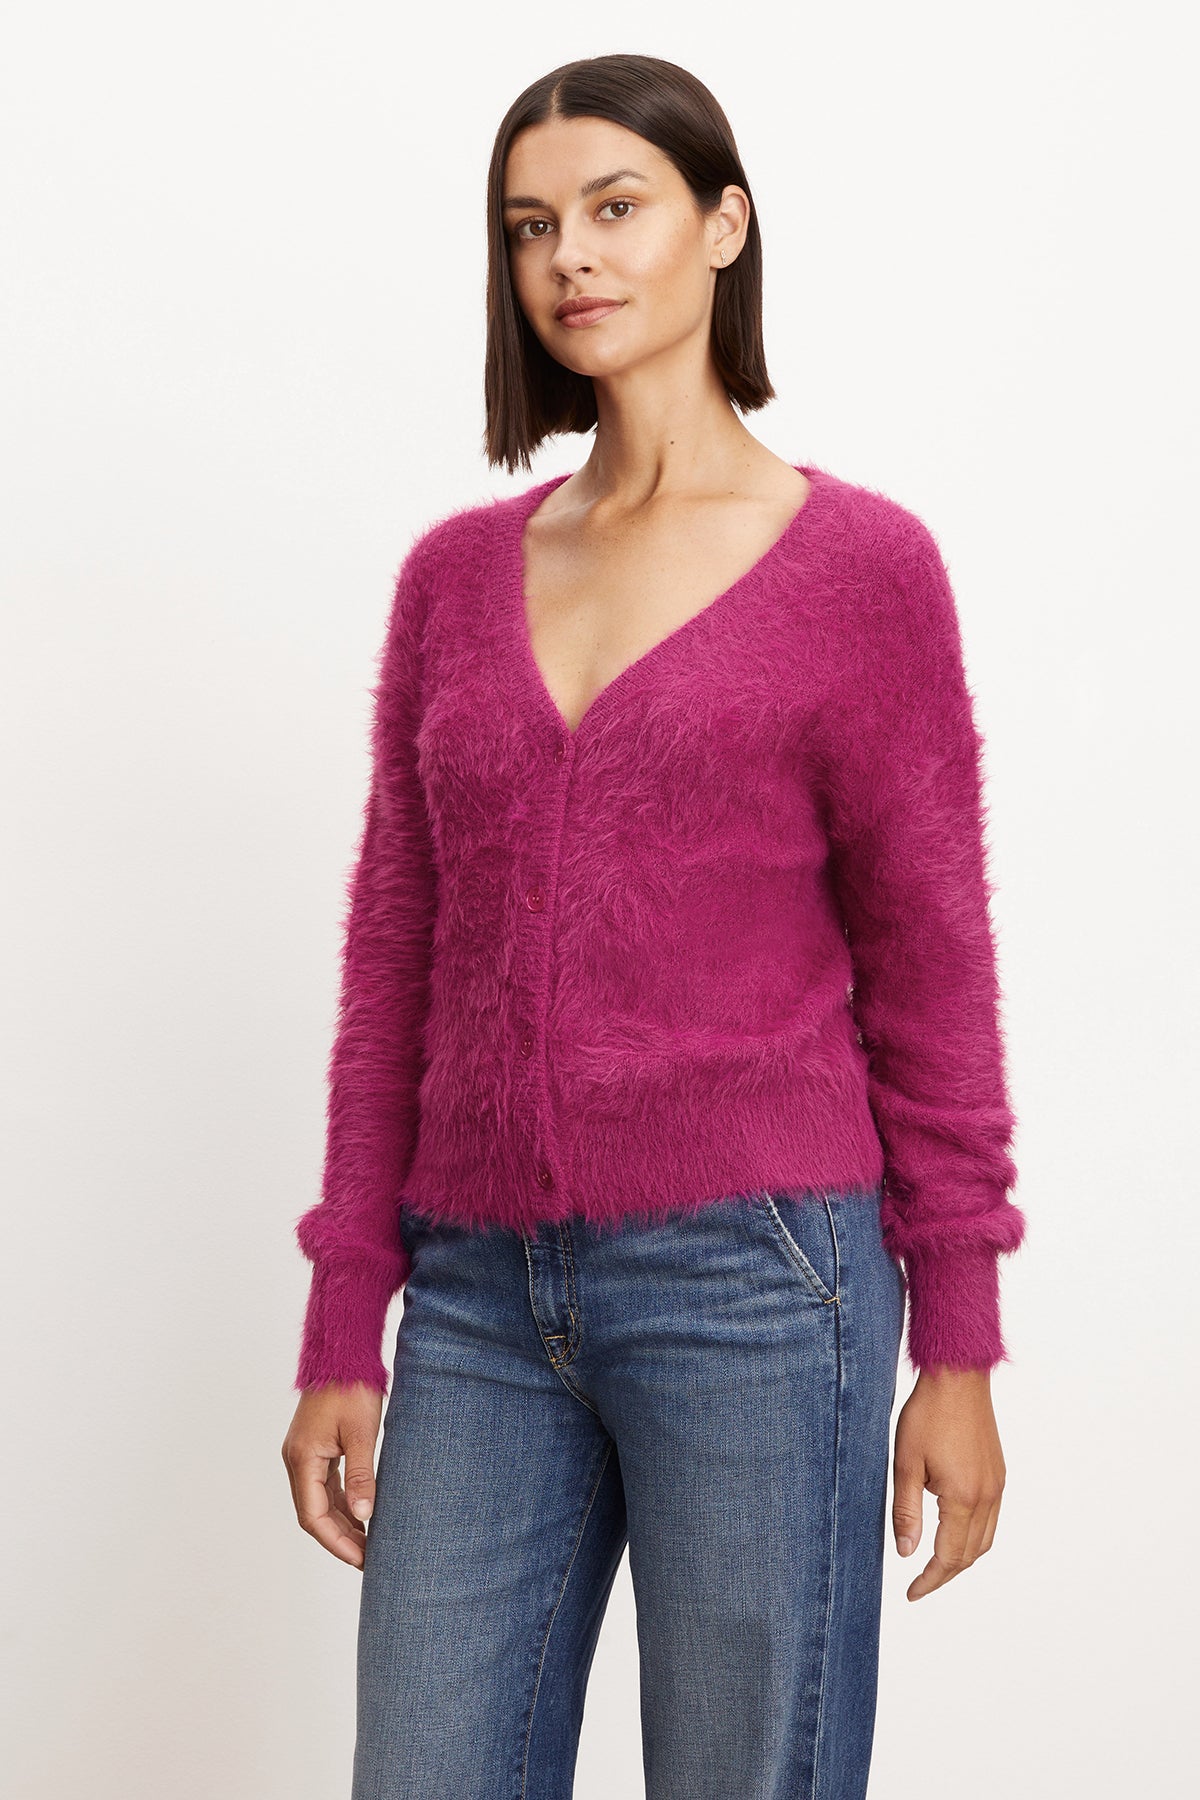   The model is wearing a pink KELSEY FEATHER YARN CARDIGAN made by Velvet by Graham & Spencer. 